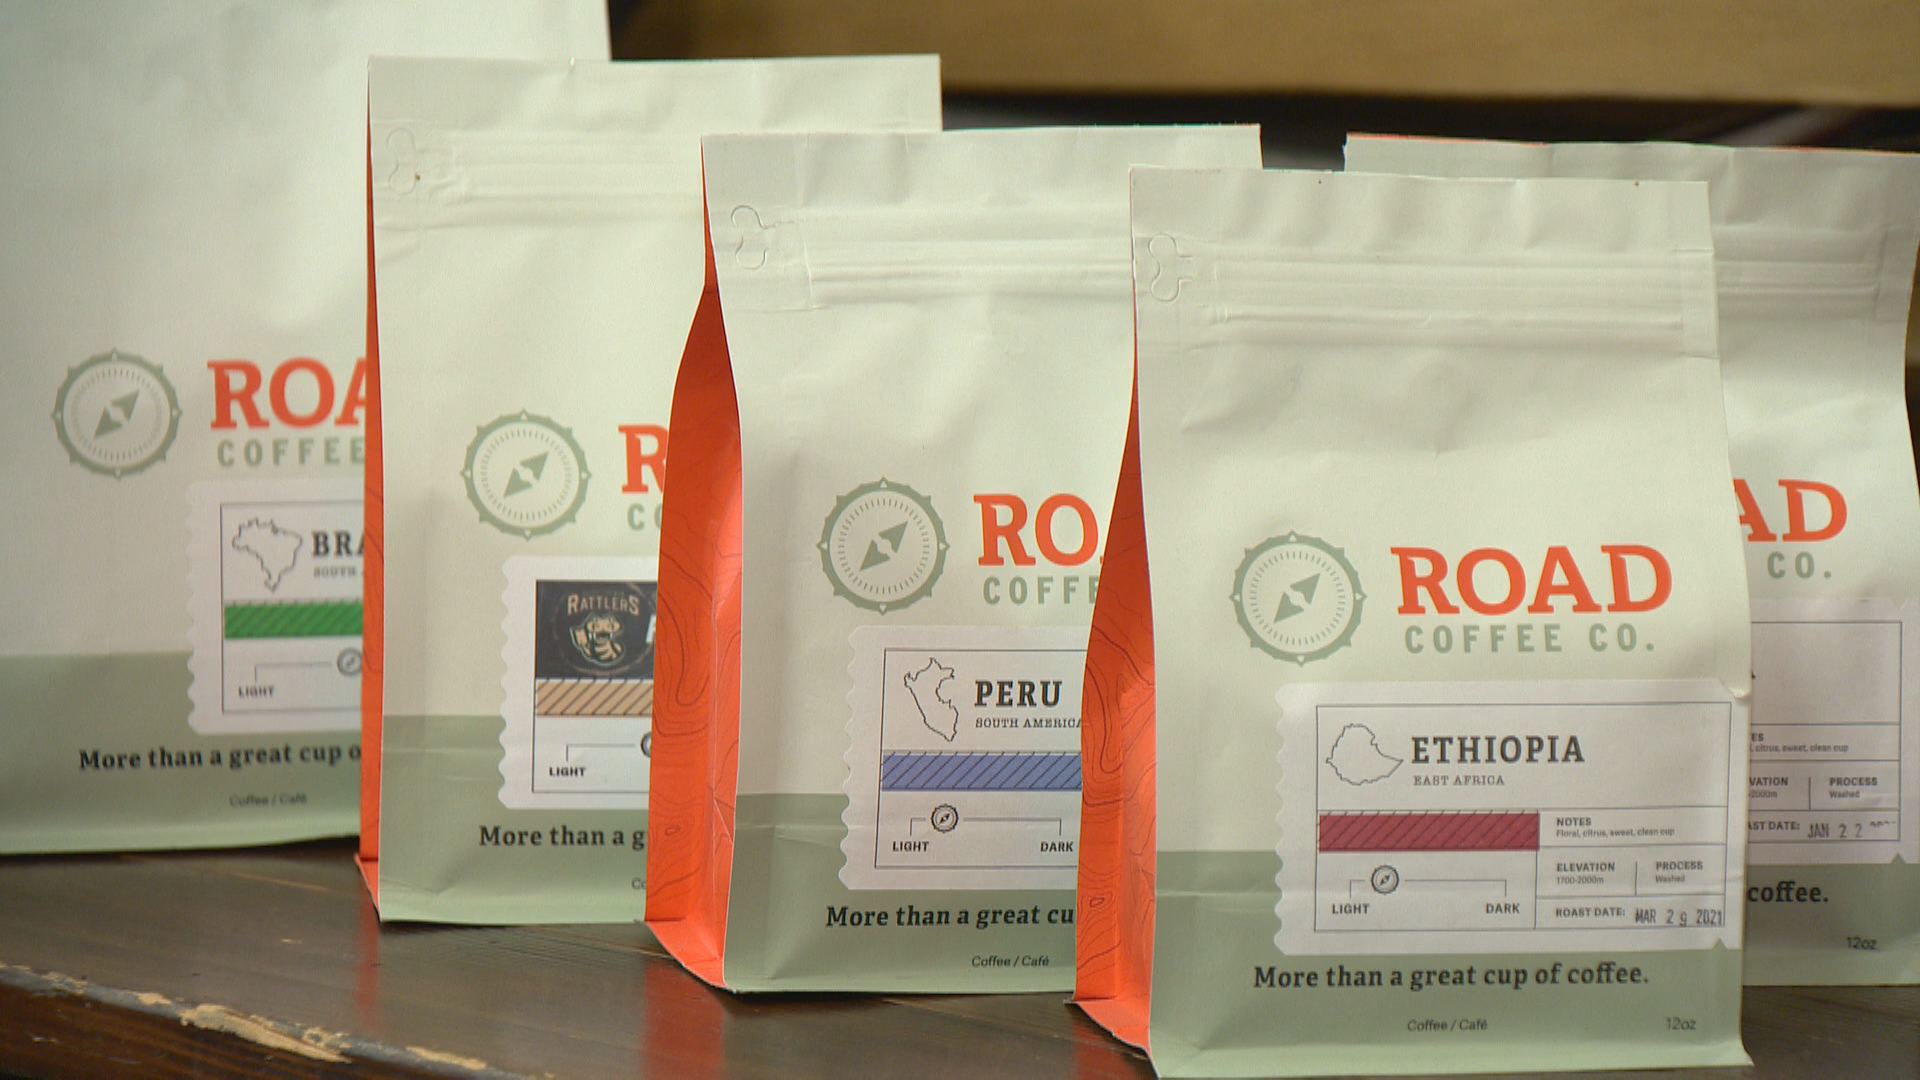 Road Coffee Co. bags of coffee.